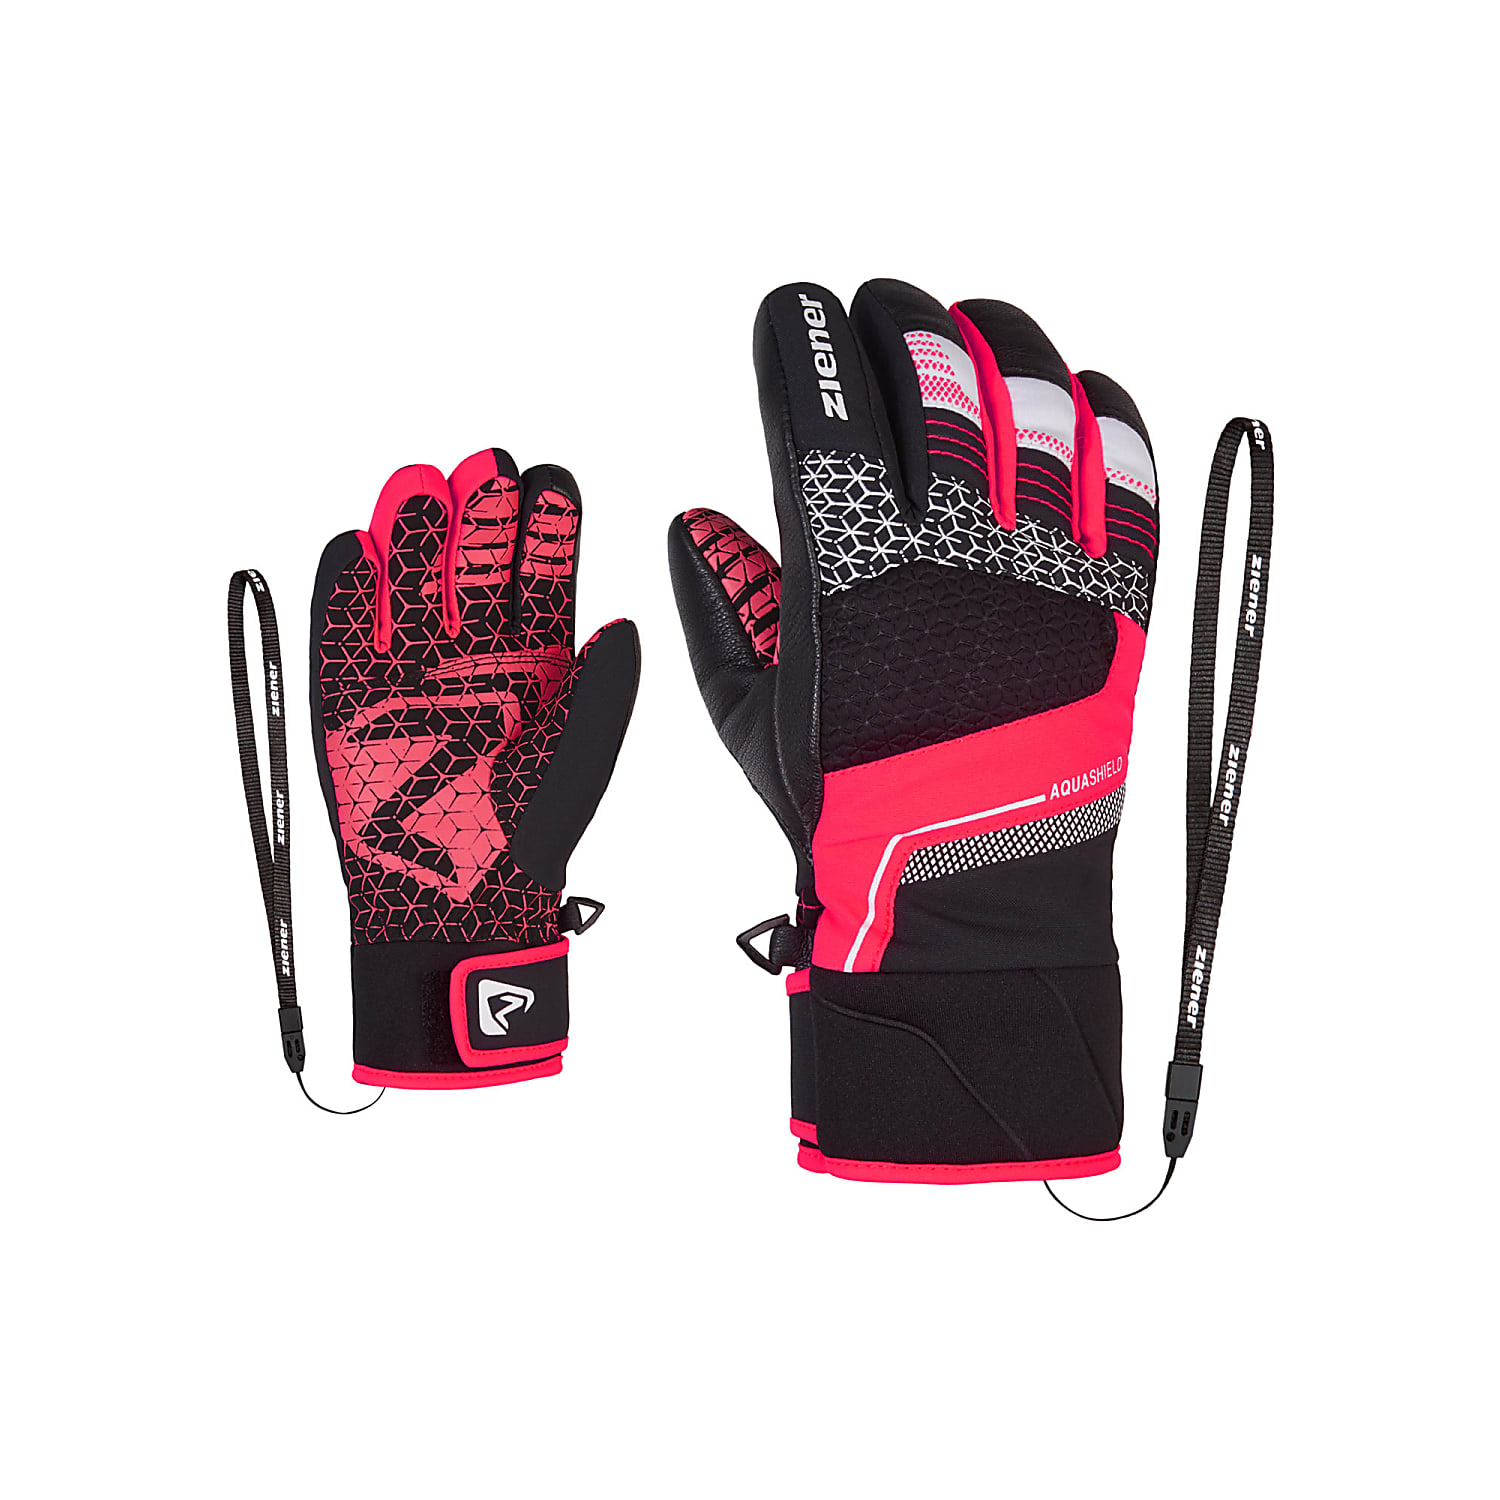 Ziener JUNIOR shipping and LONZALO - Black Fast - Neon PR cheap AS GLOVE, Pink